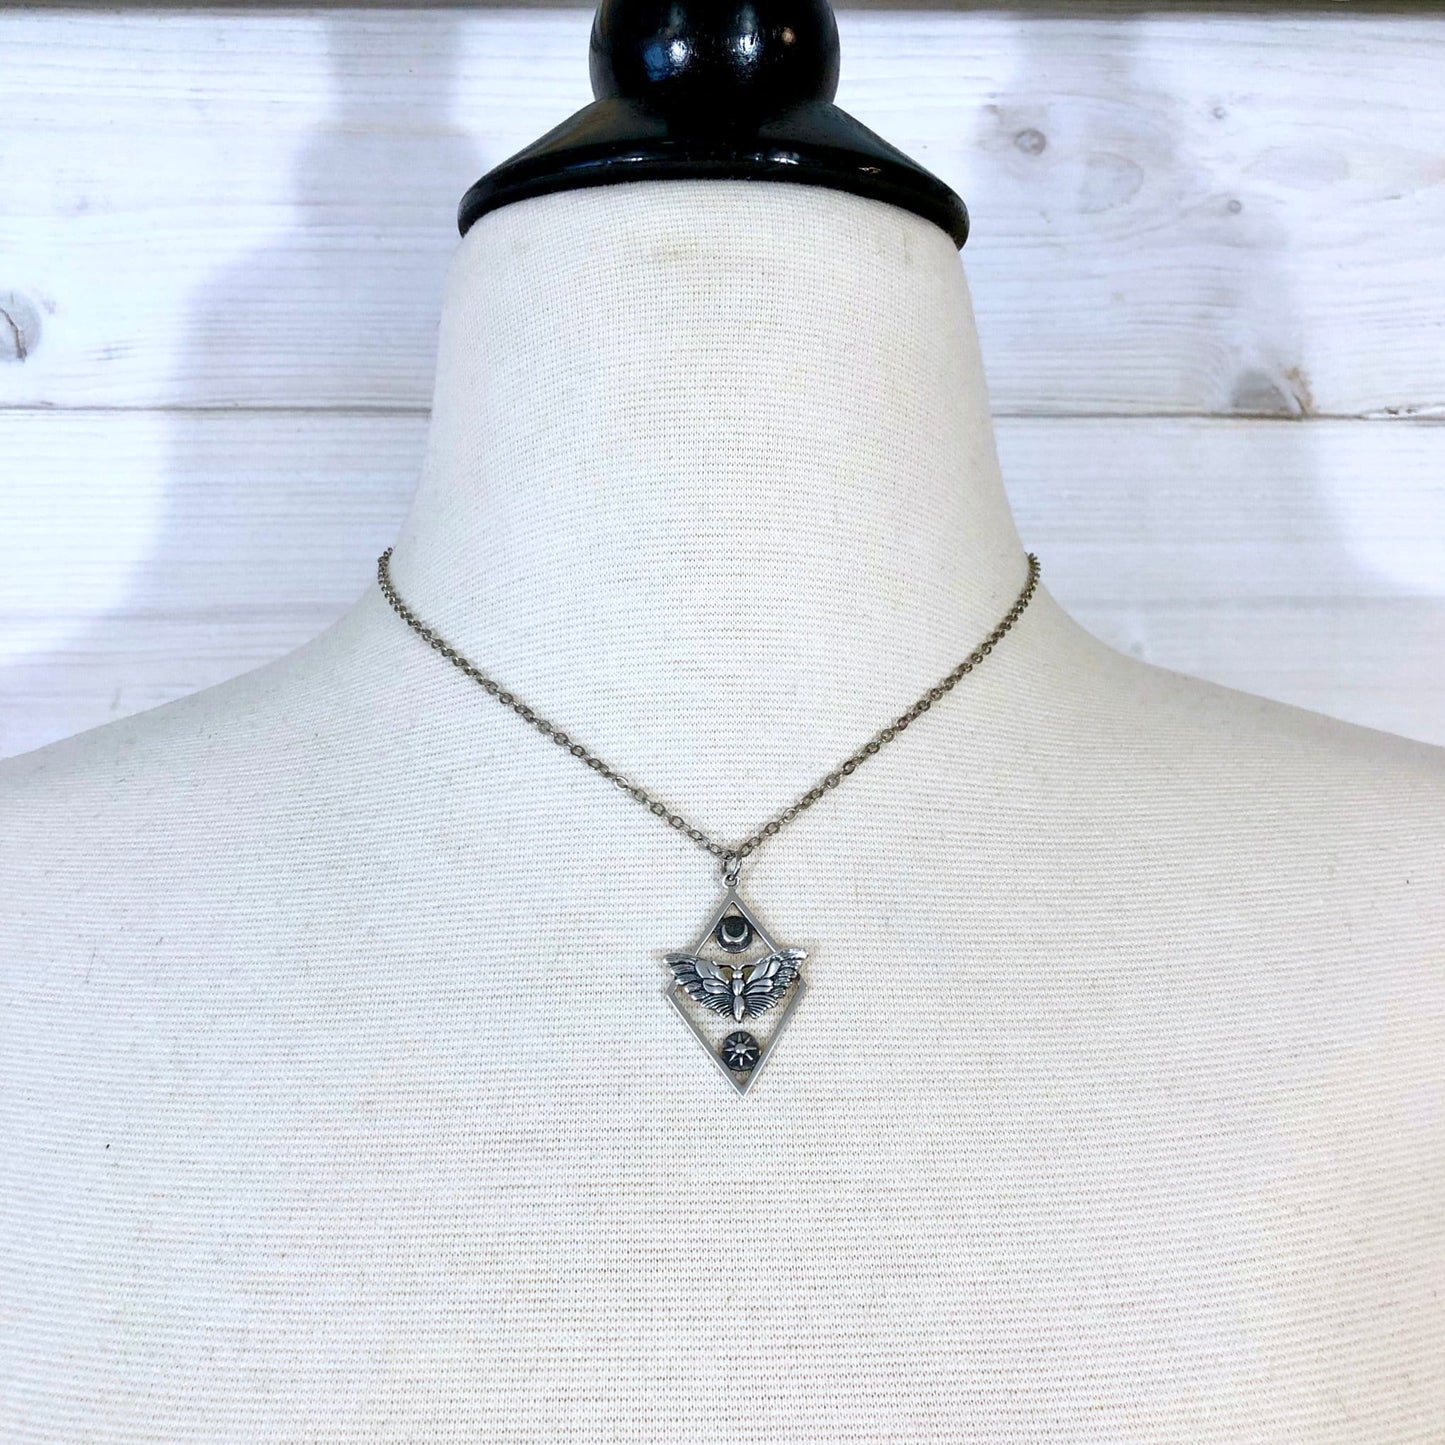 Tiny Talisman Collection - Sterling Silver Geometric Moth Necklace with Sun and Moon 32x21mm /